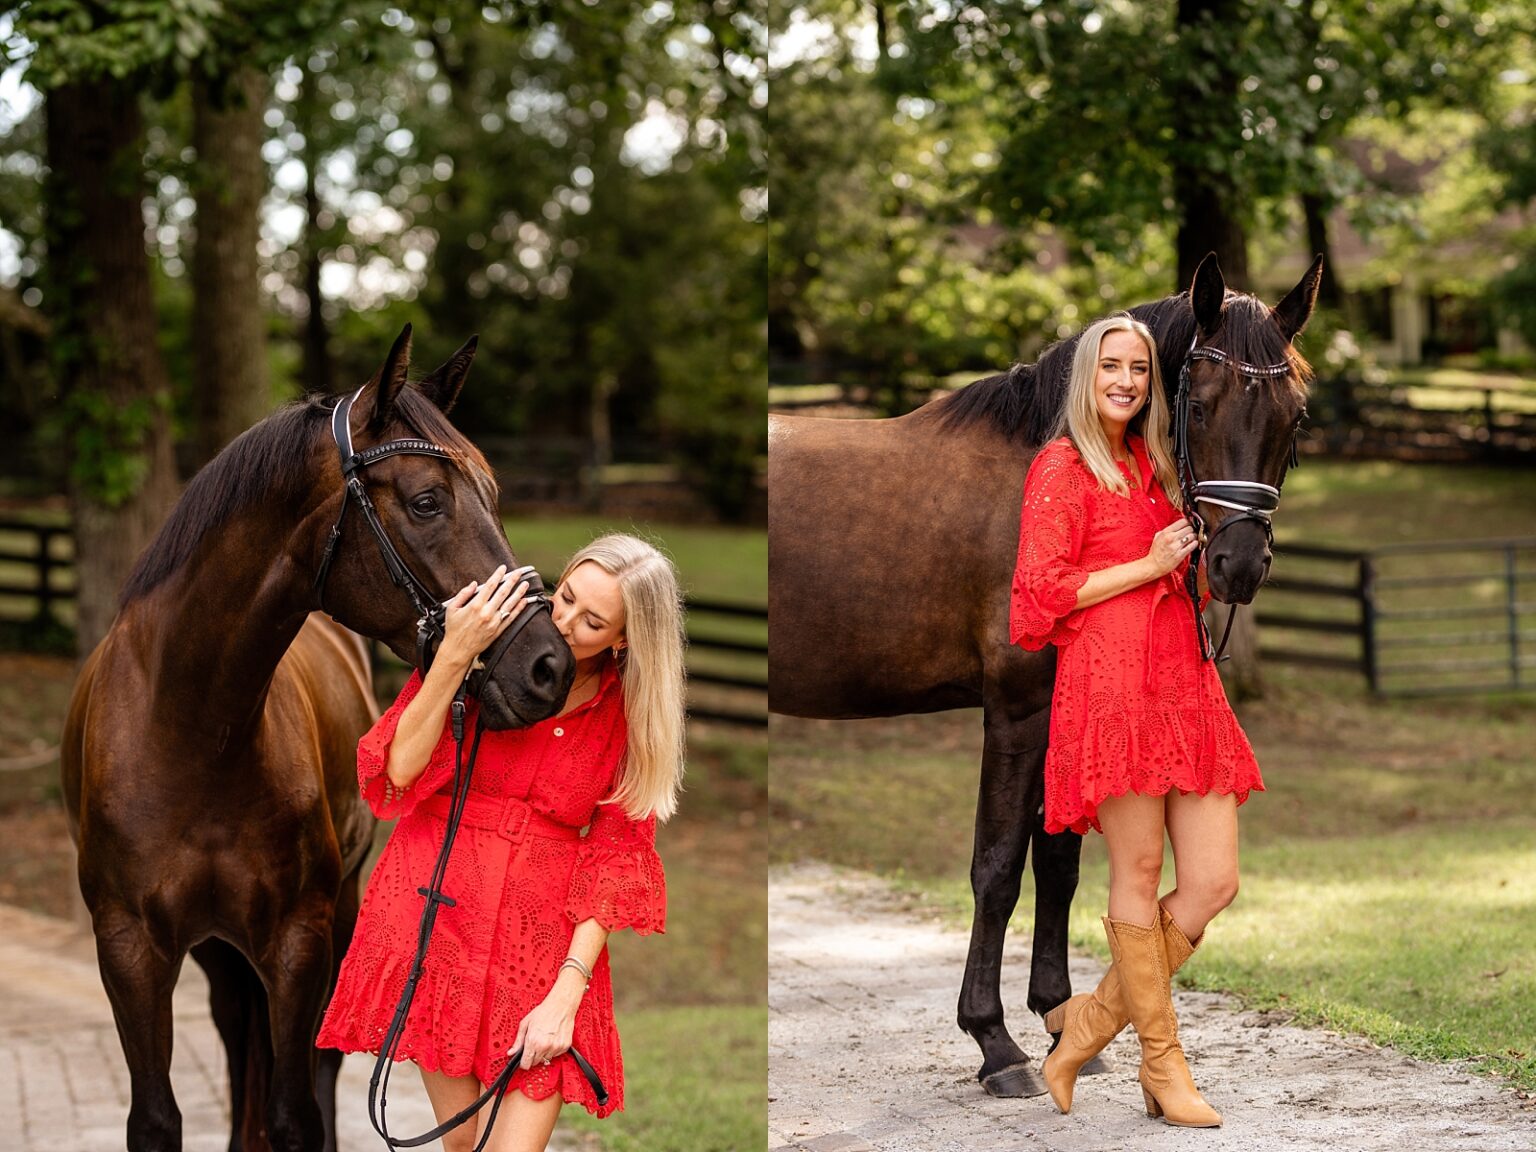 Girl in red dress takes photos with her horse in Atlanta, Georgia. Dressage Rider. Outfit ideas for horse and rider photoshoot. Atlanta equine photographer.